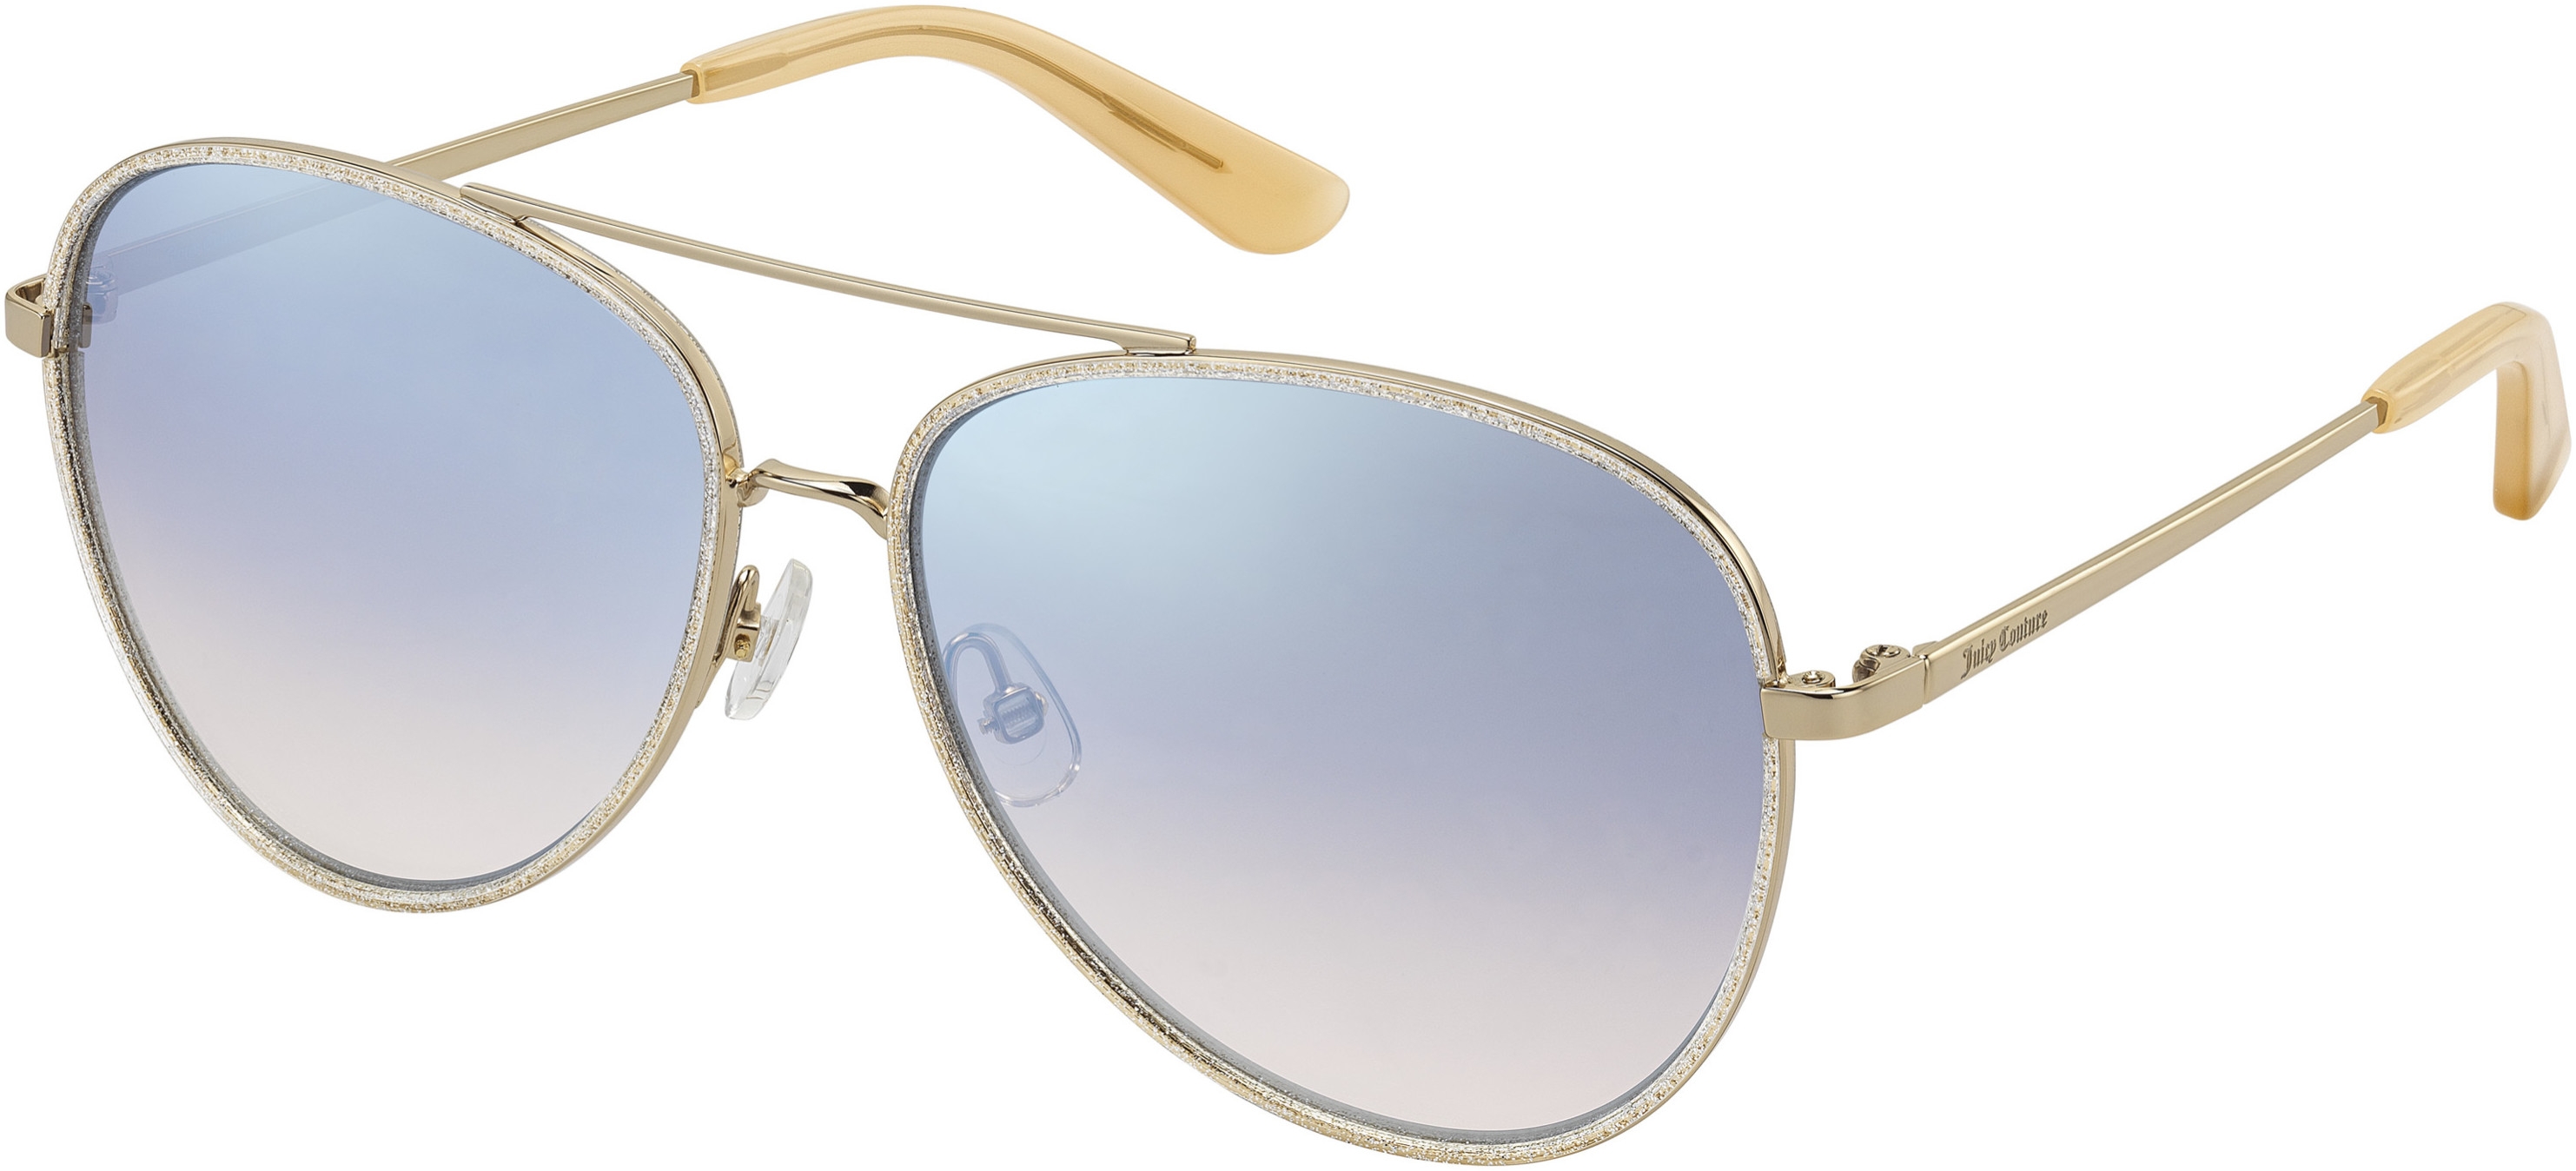 JUICY COUTURE 599 24SIC